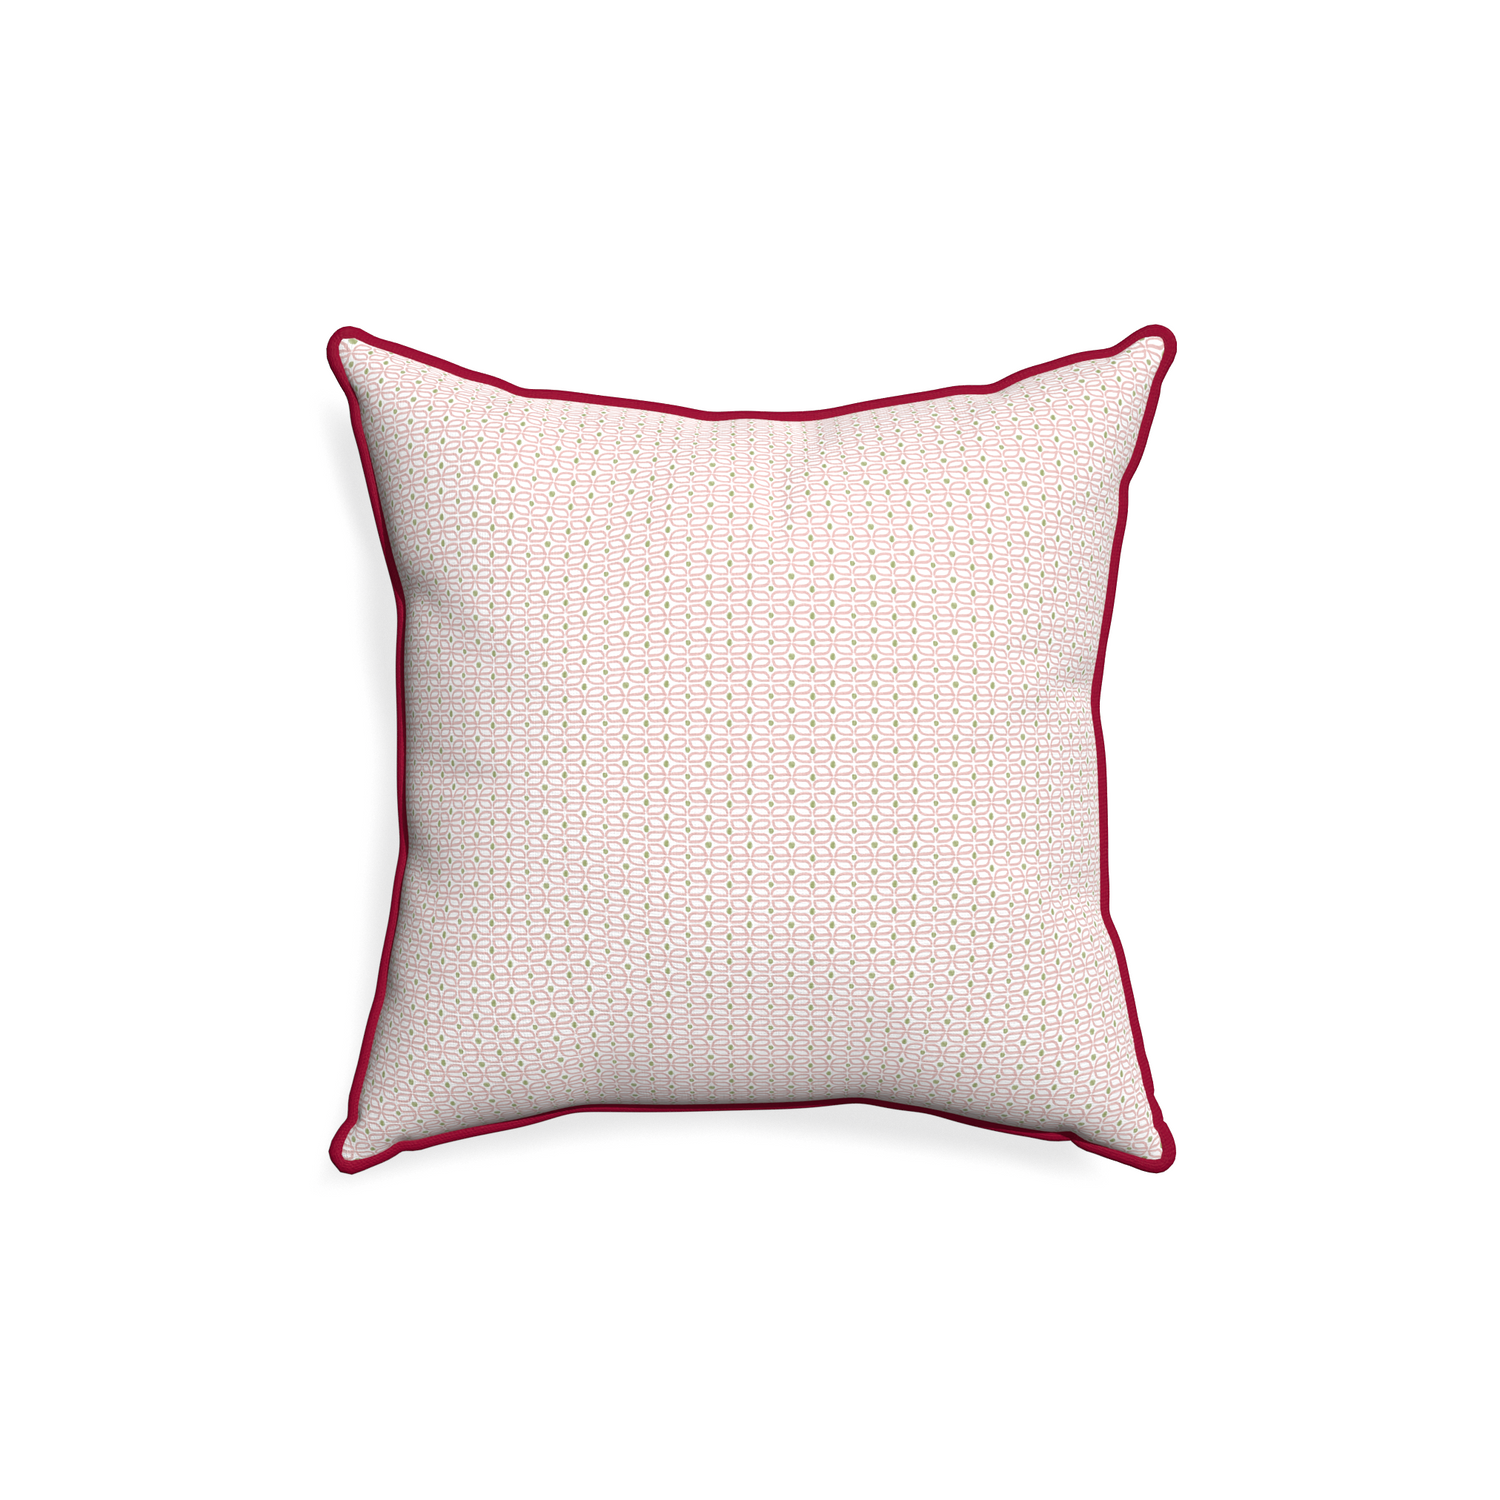 18-square loomi pink custom pink geometricpillow with raspberry piping on white background